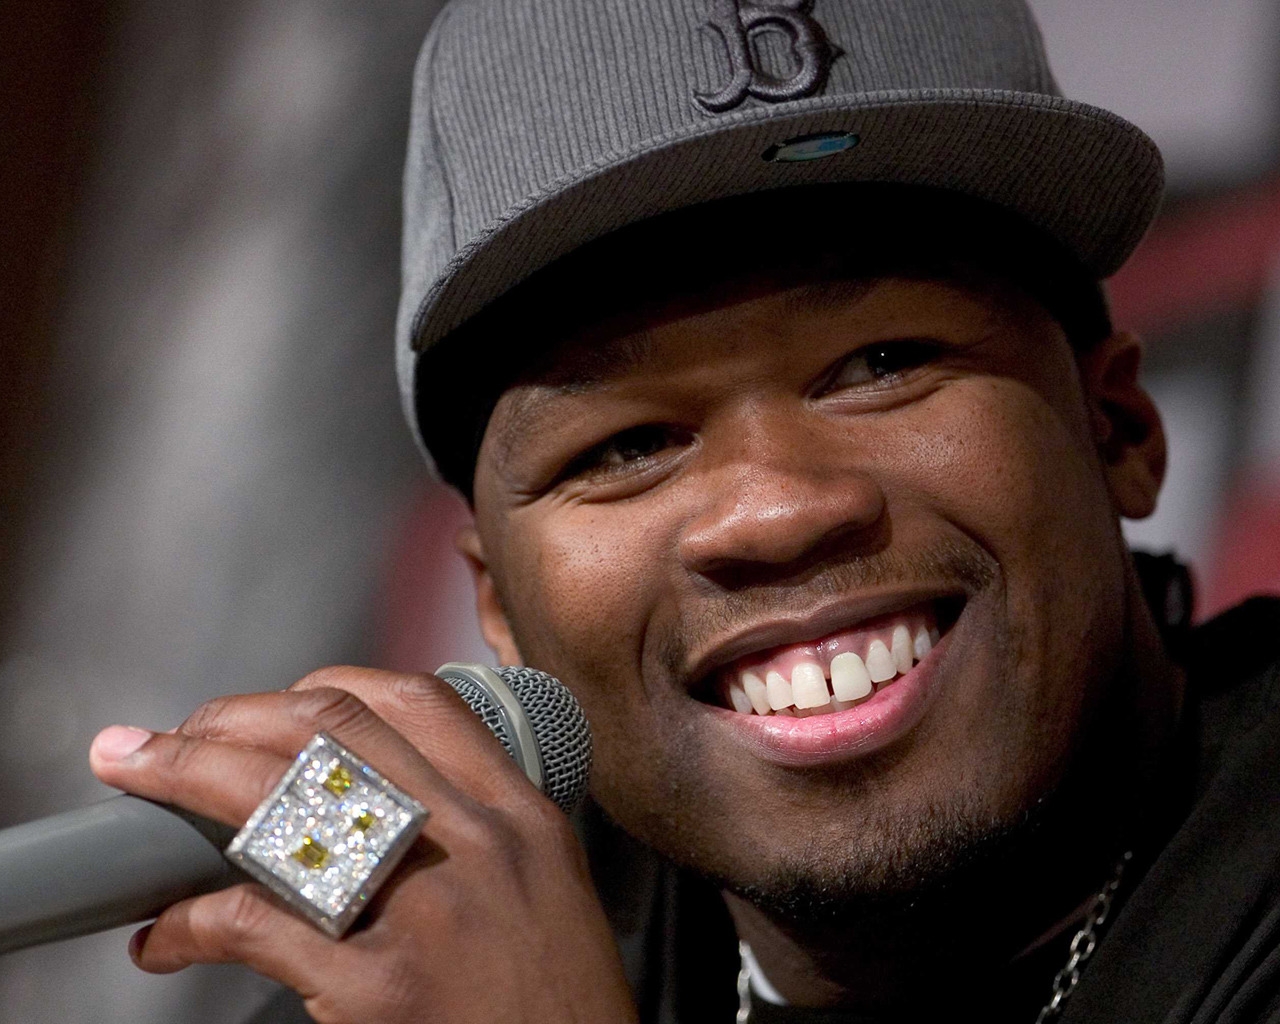 50 Cent Smile for 1280 x 1024 resolution